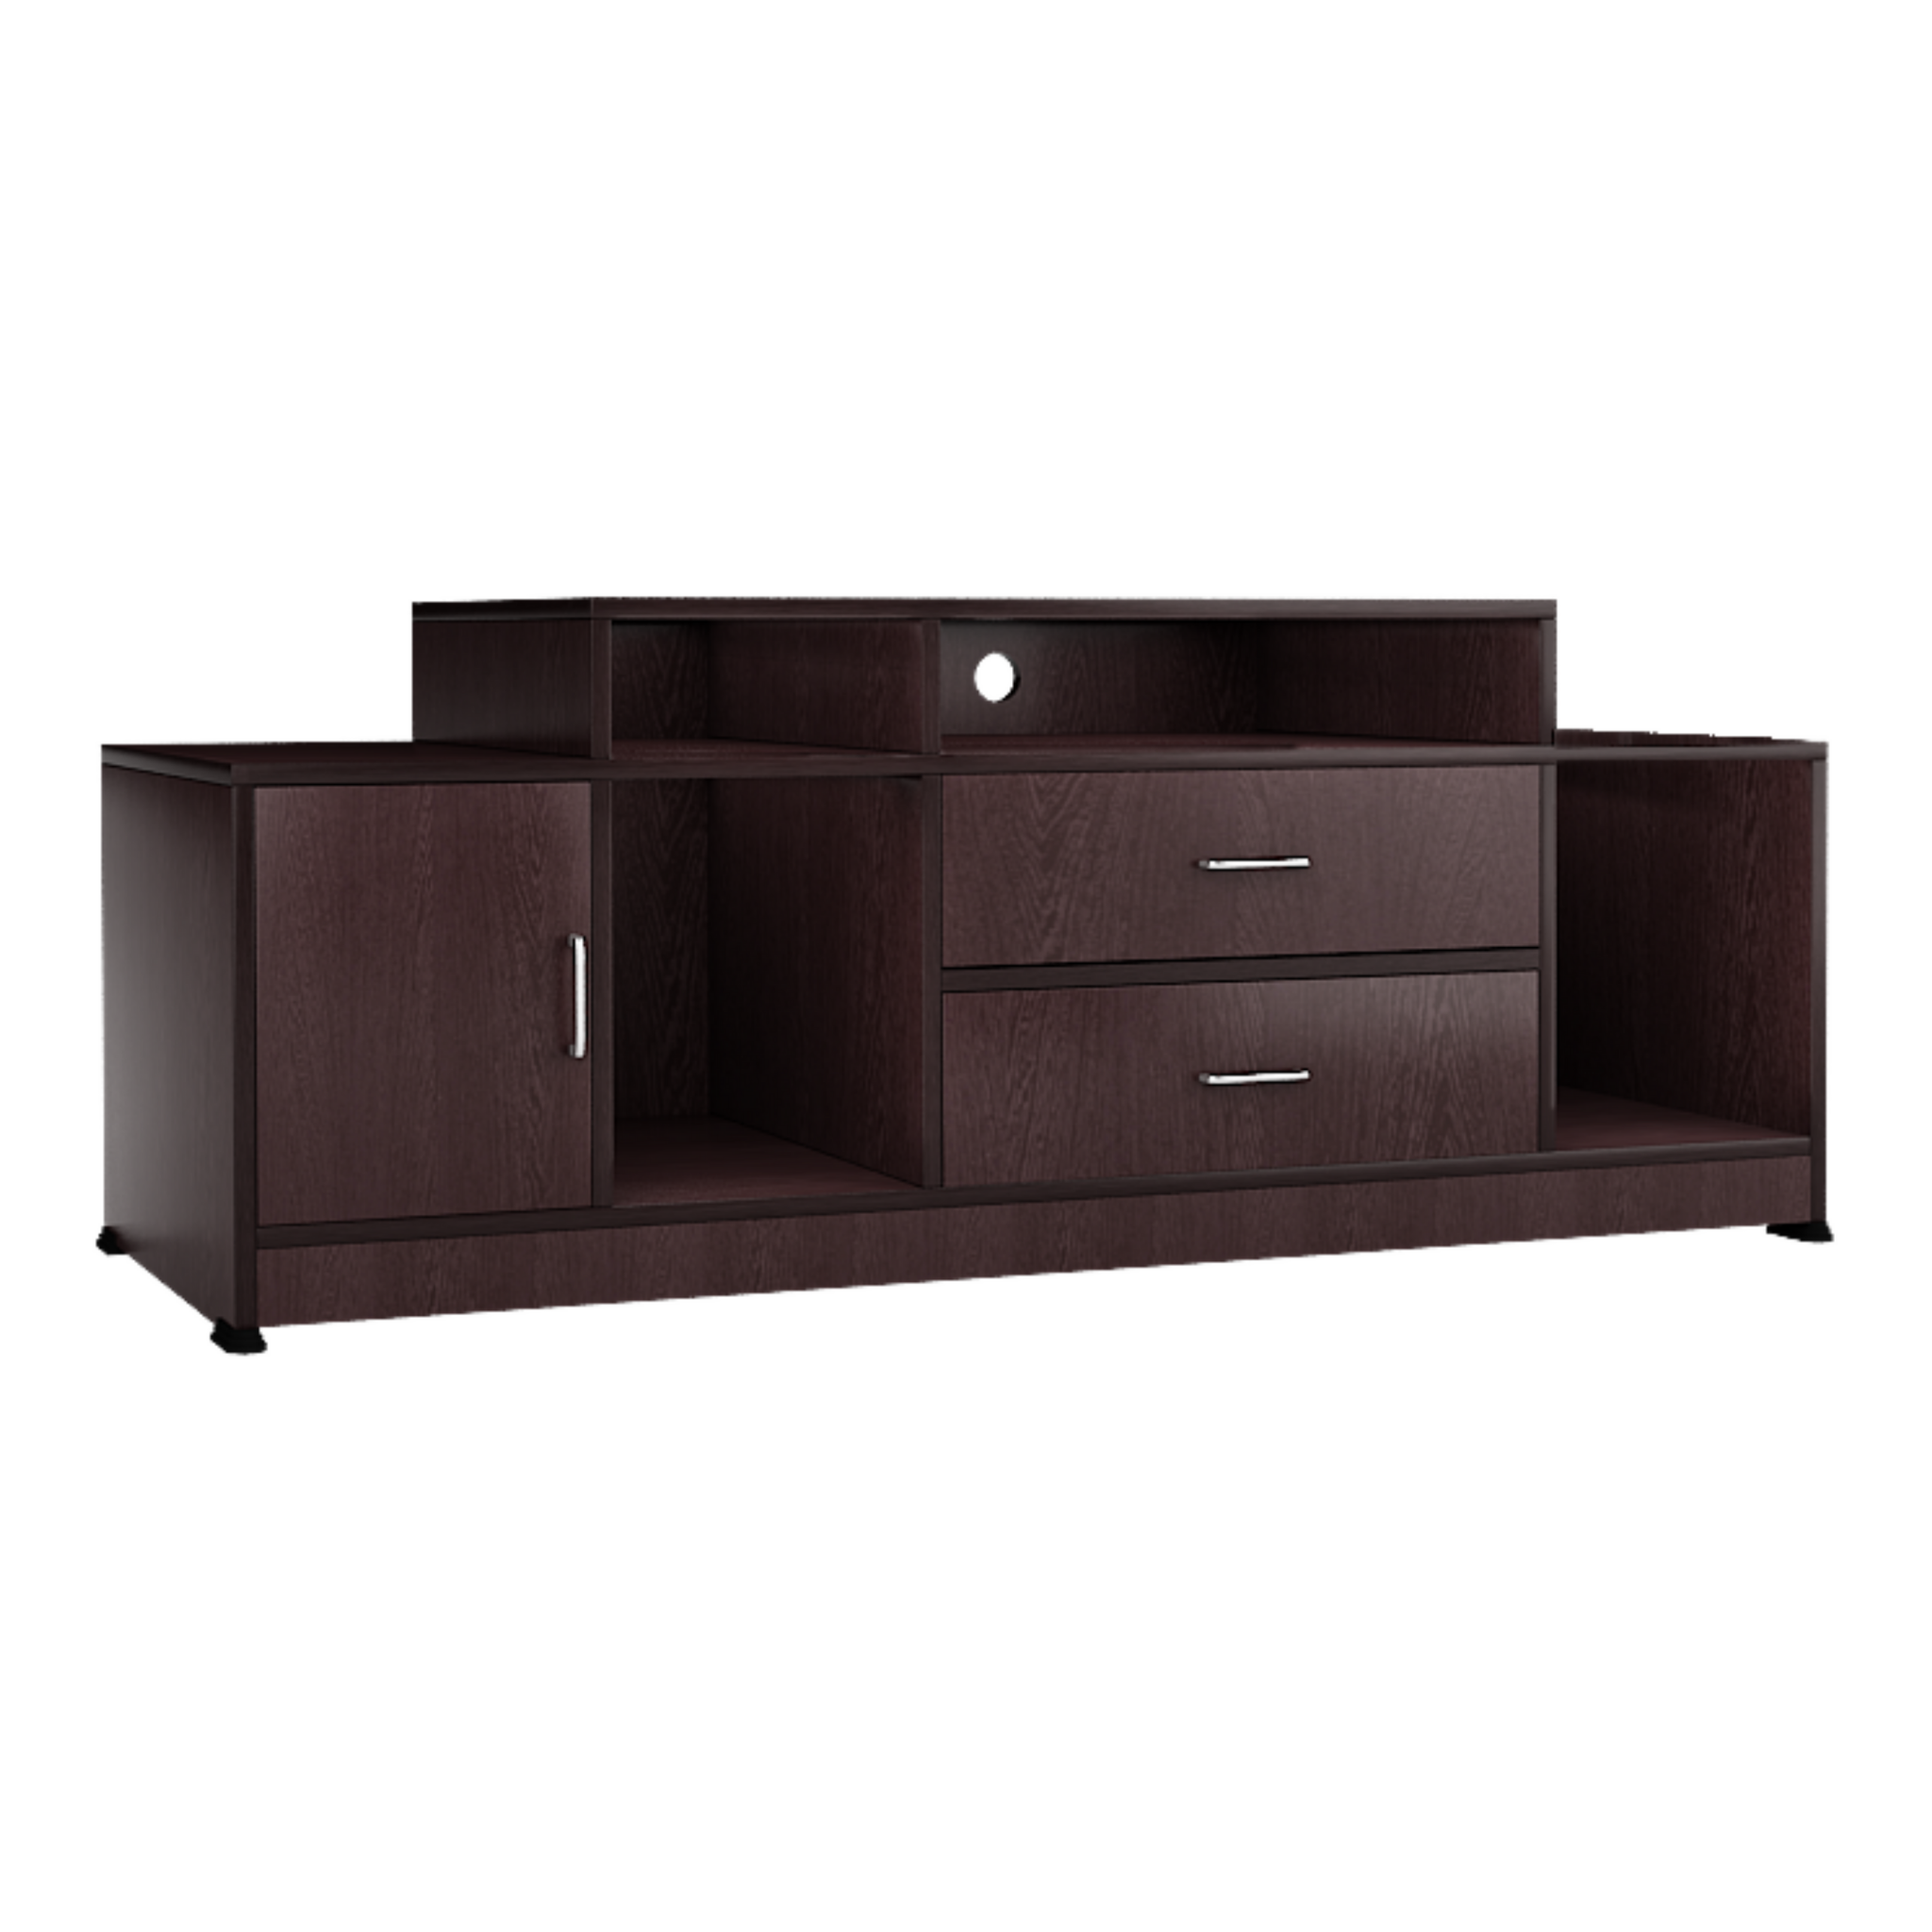 Large Tv Unit with Two Pull Out Drawers